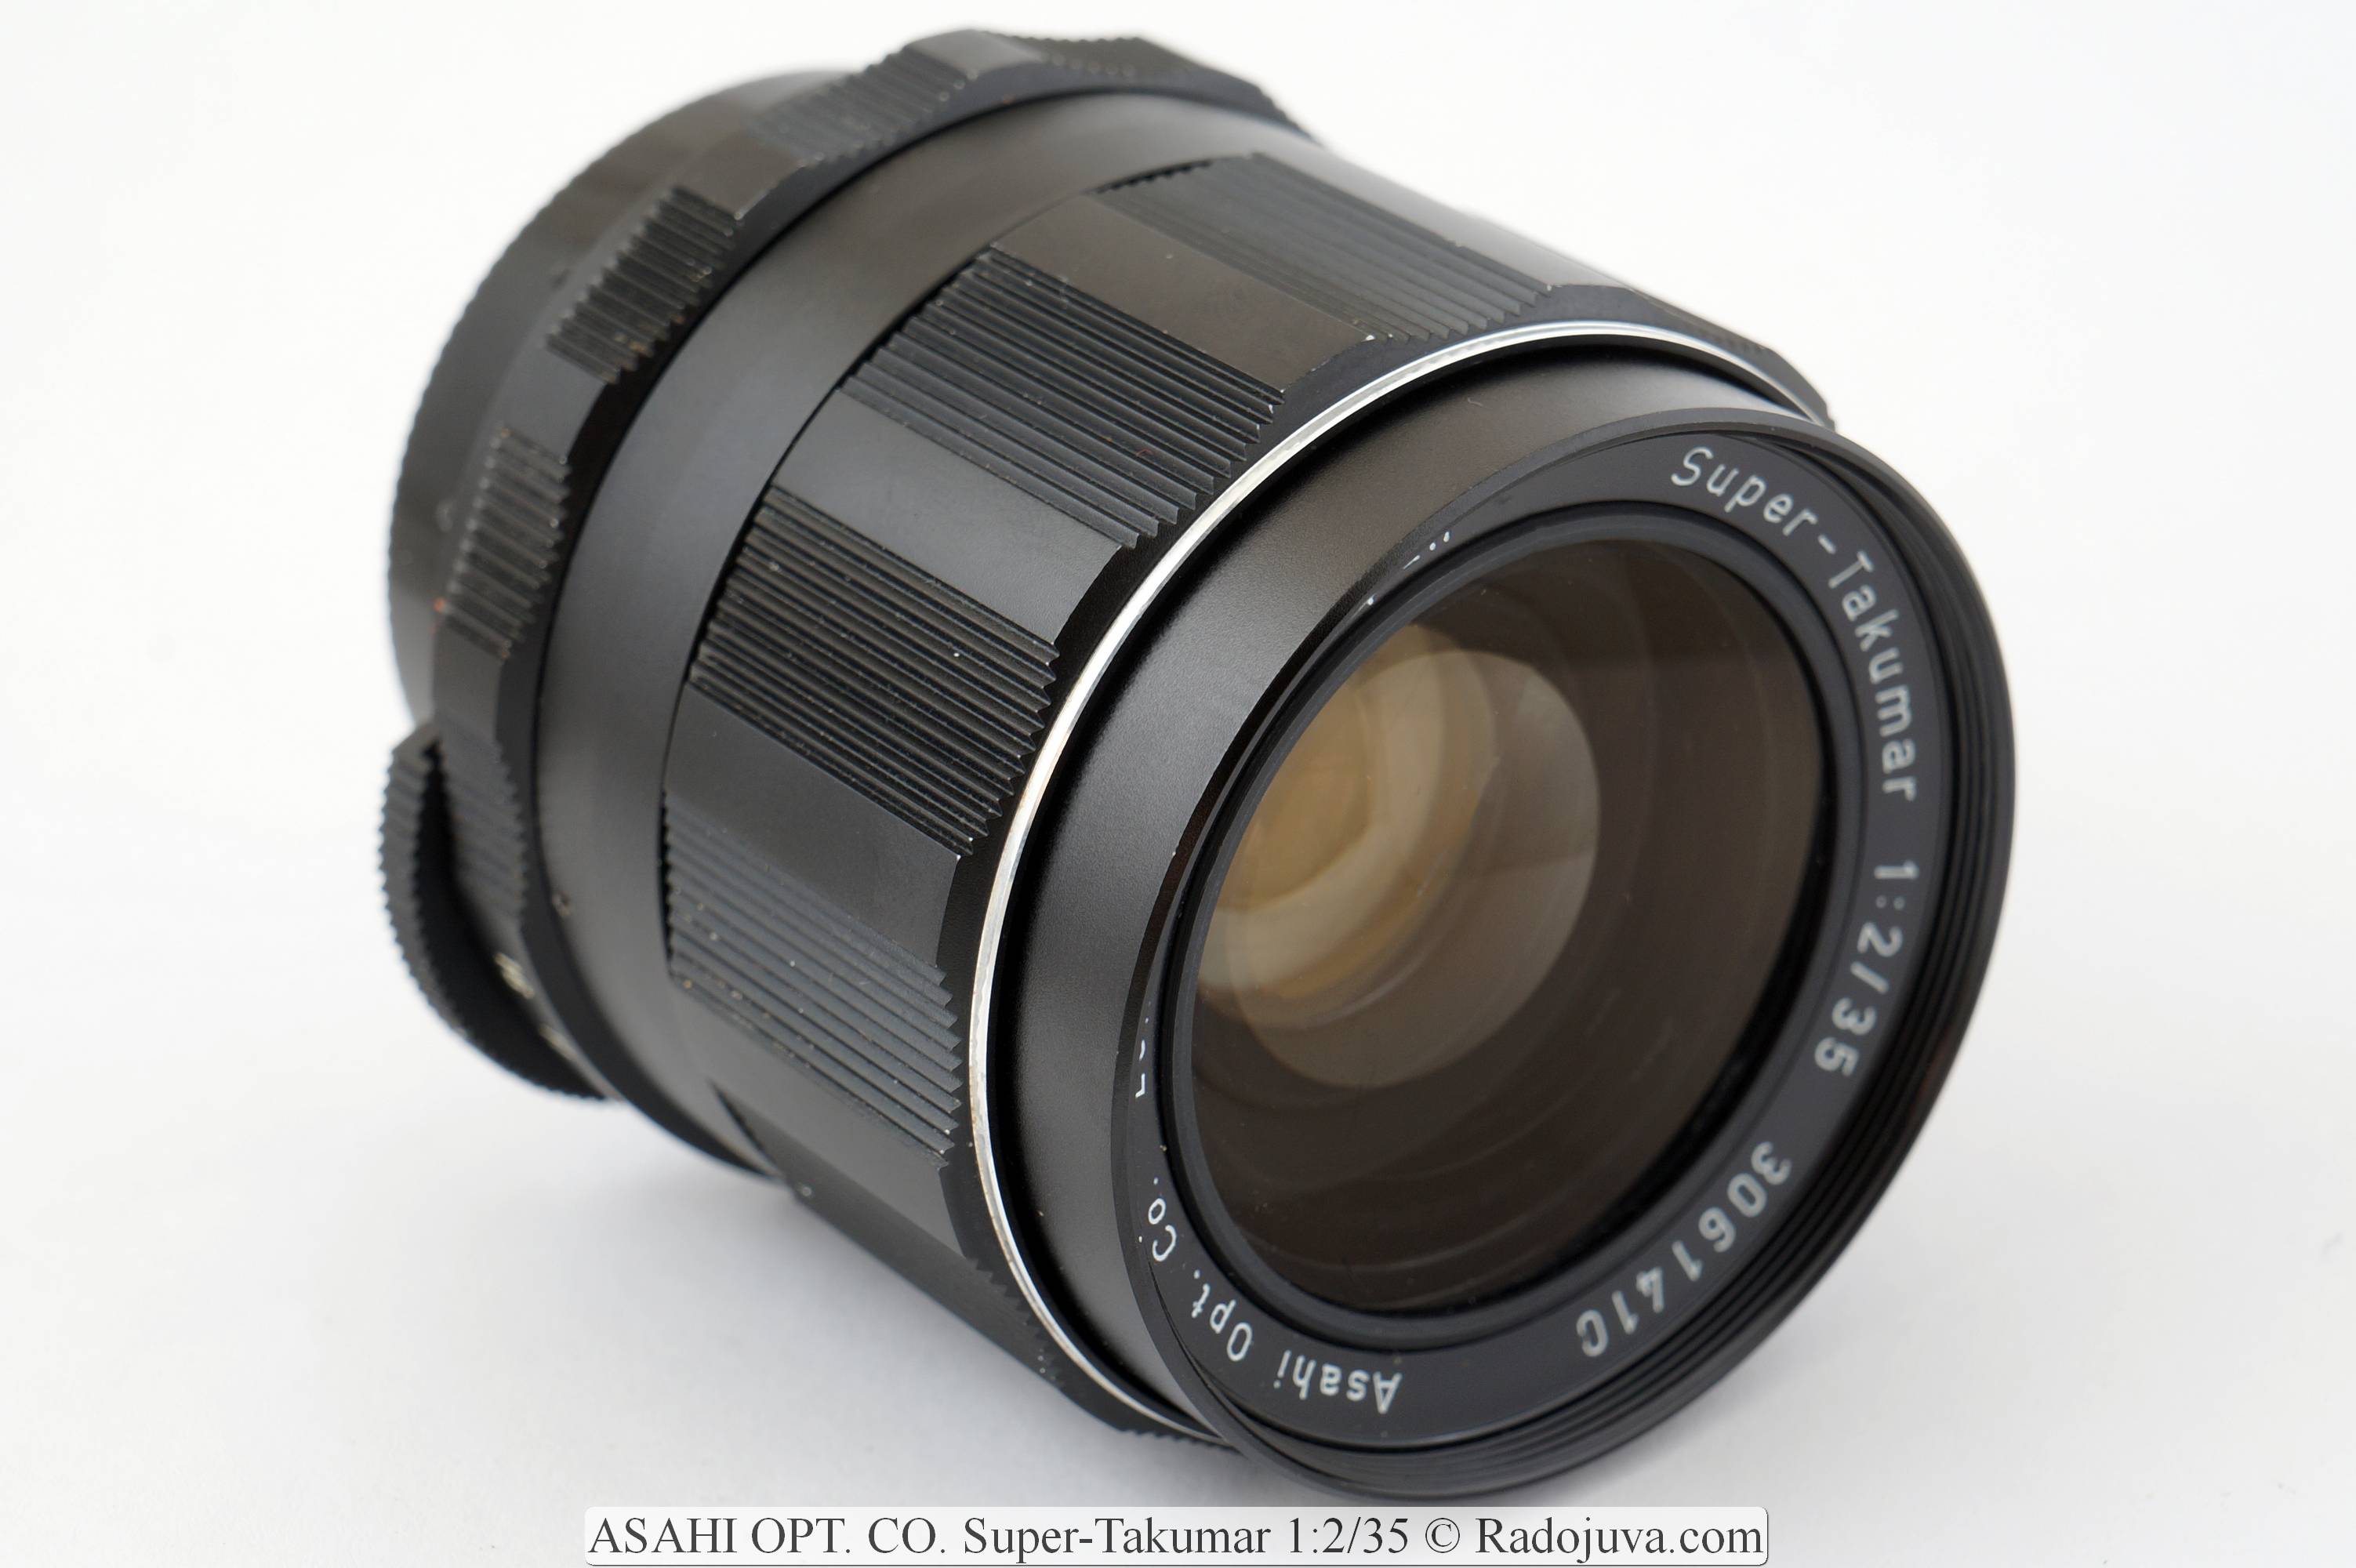 Brief overview of ASAHI OPT. Co. Super Takumar 1:2/35 | Happy